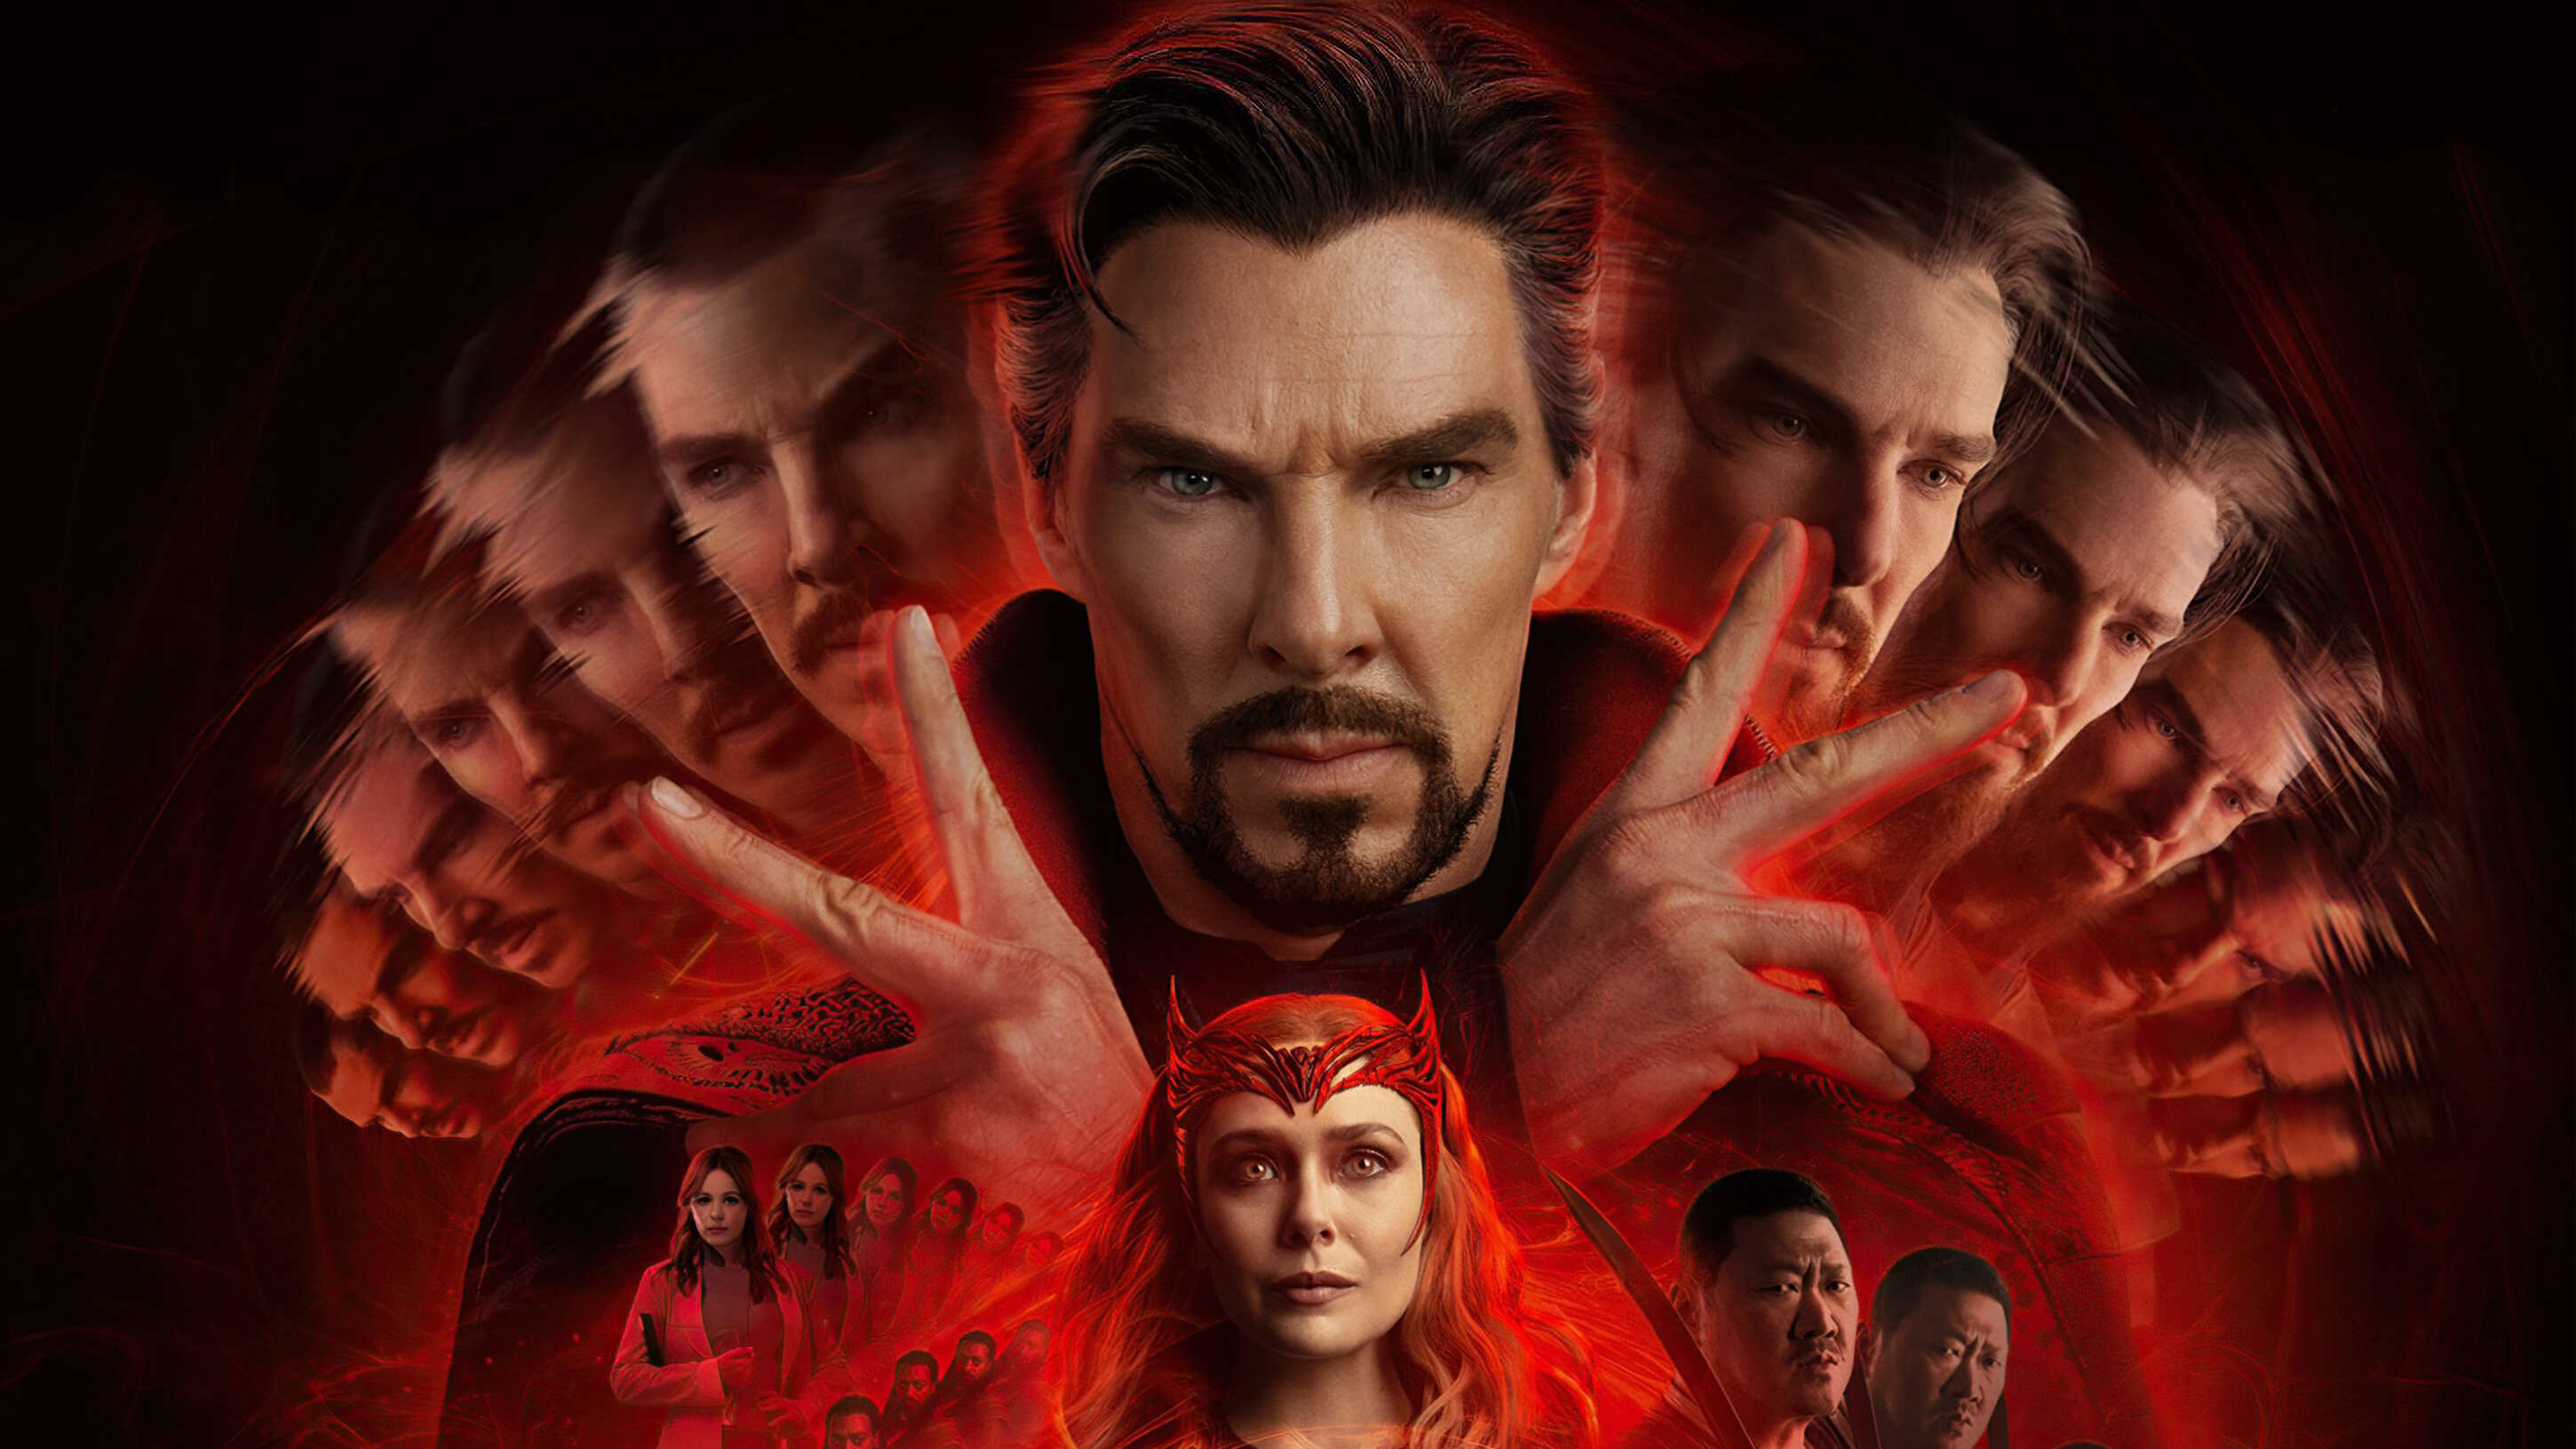 44-facts-about-the-movie-doctor-strange-in-the-multiverse-of-madness